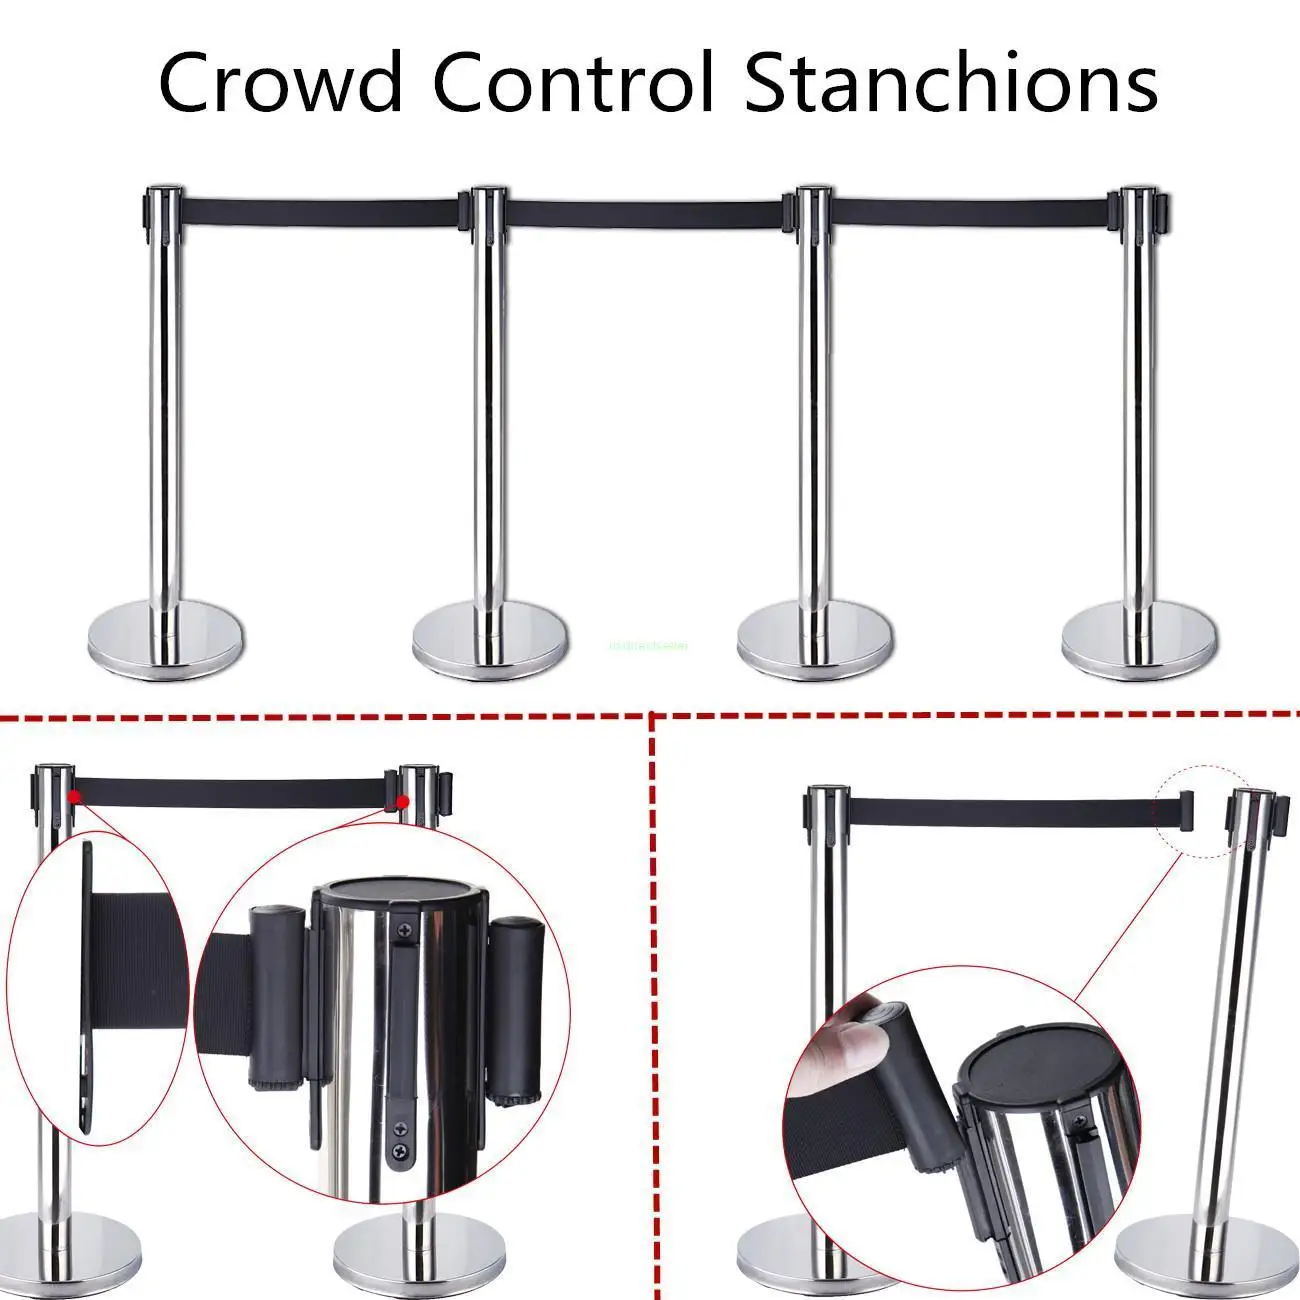 (Ship from CA)4x Retractable Stanchions /Stretch Style Crowd Control Barriers Black Belts New